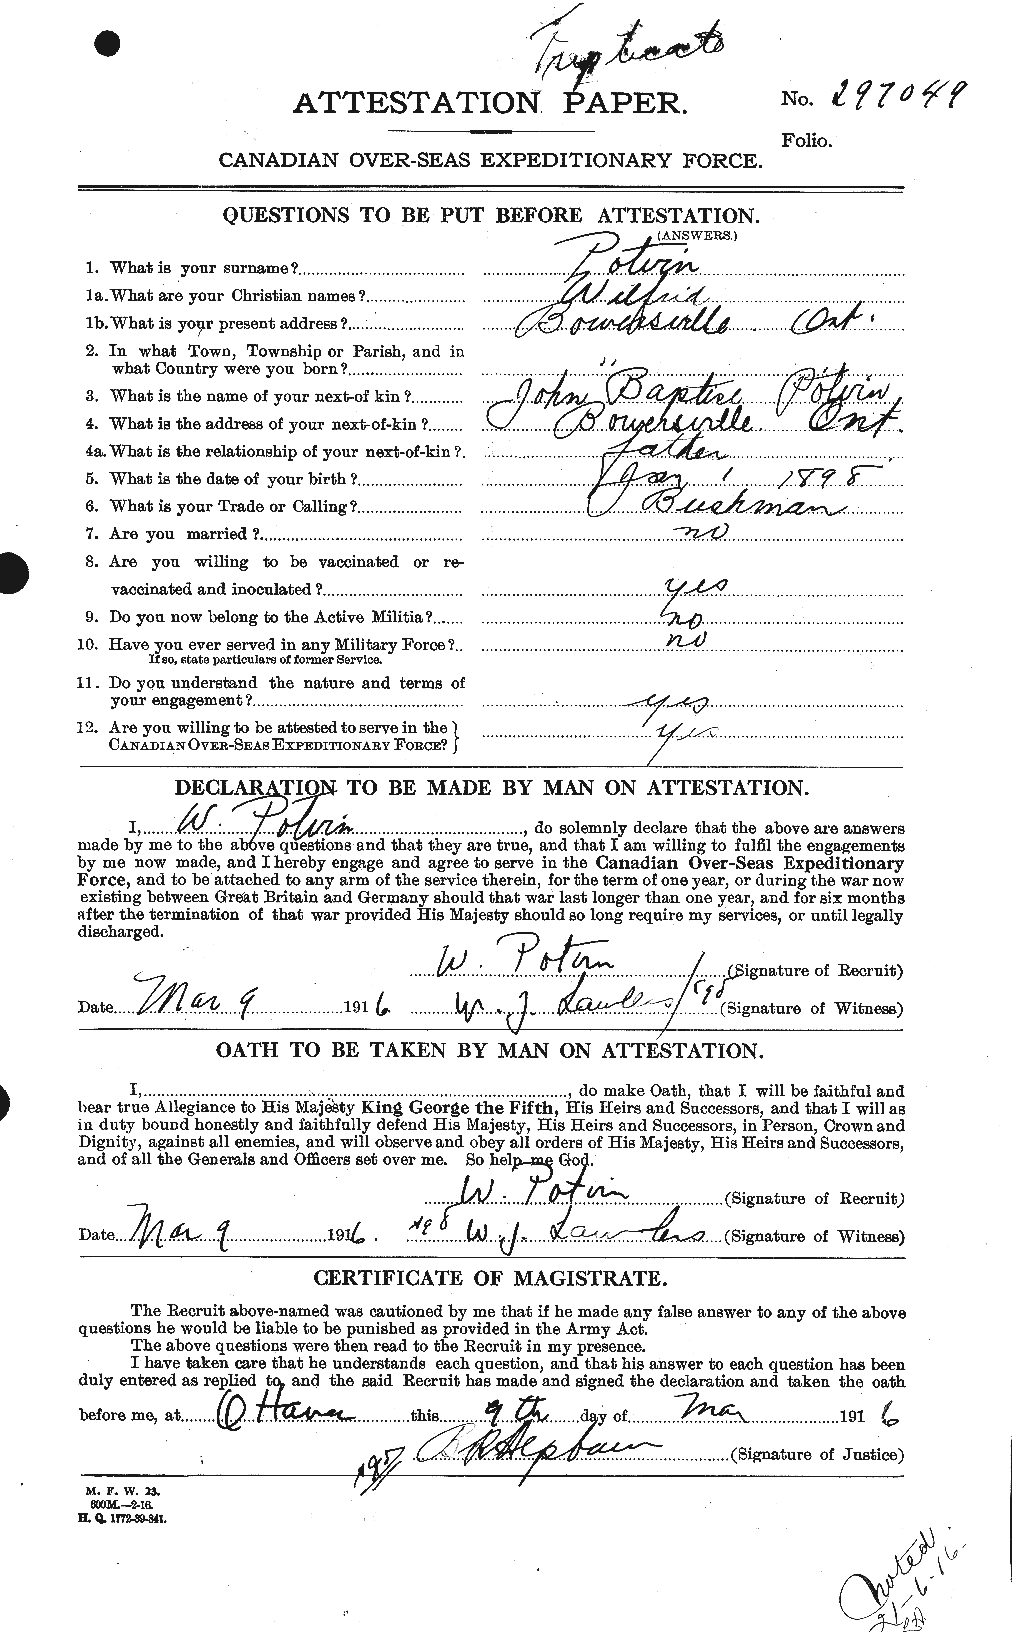 Personnel Records of the First World War - CEF 584674a